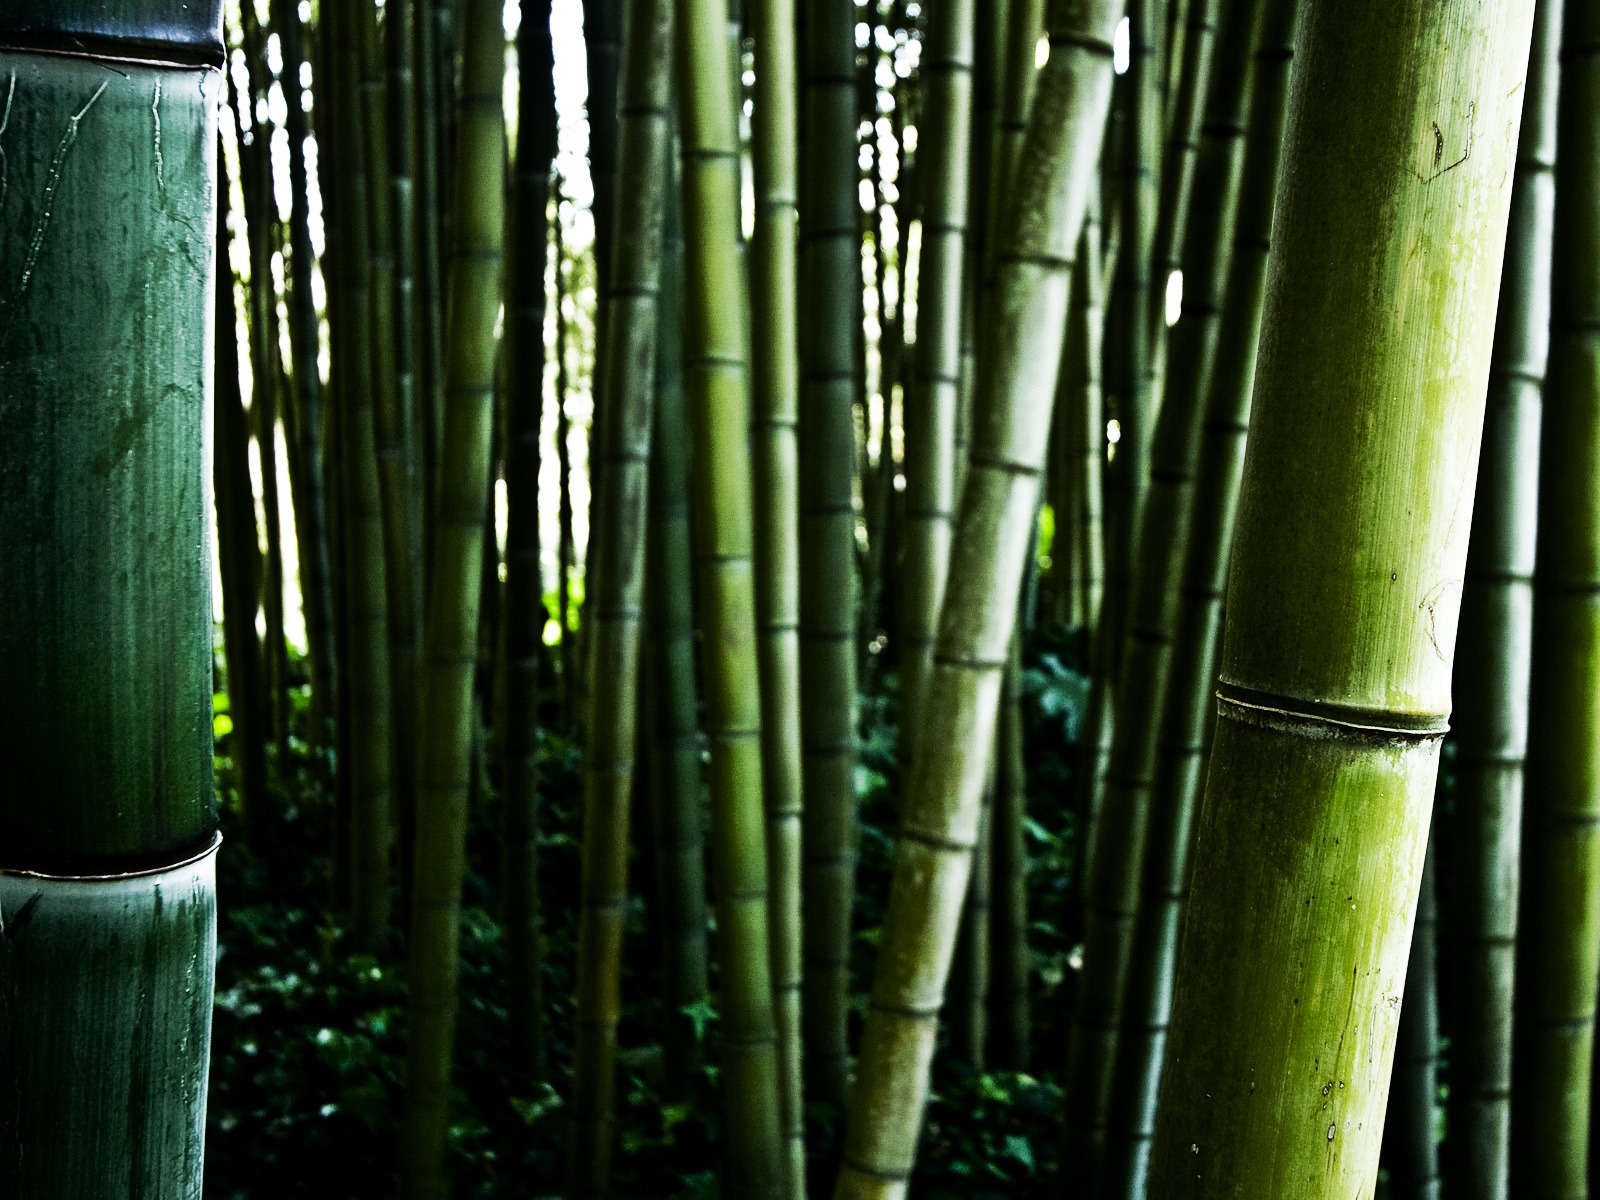 Bamboo stalks for 1600 x 1200 resolution